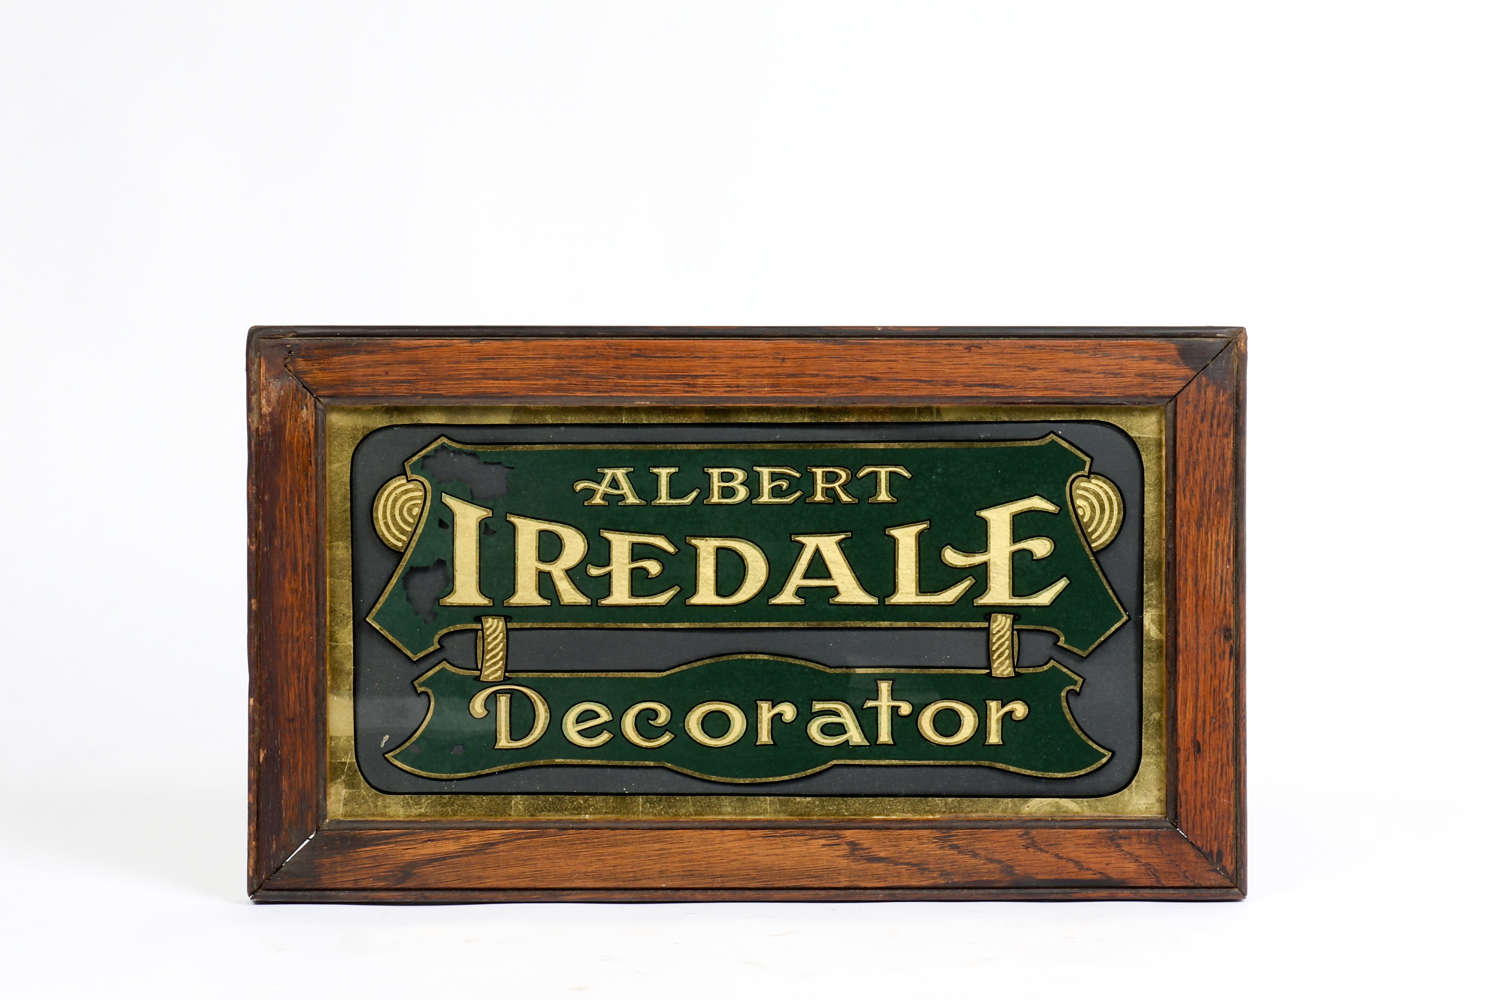 Reverse-painted glass advertising sign for Albert Iredale - Decorator